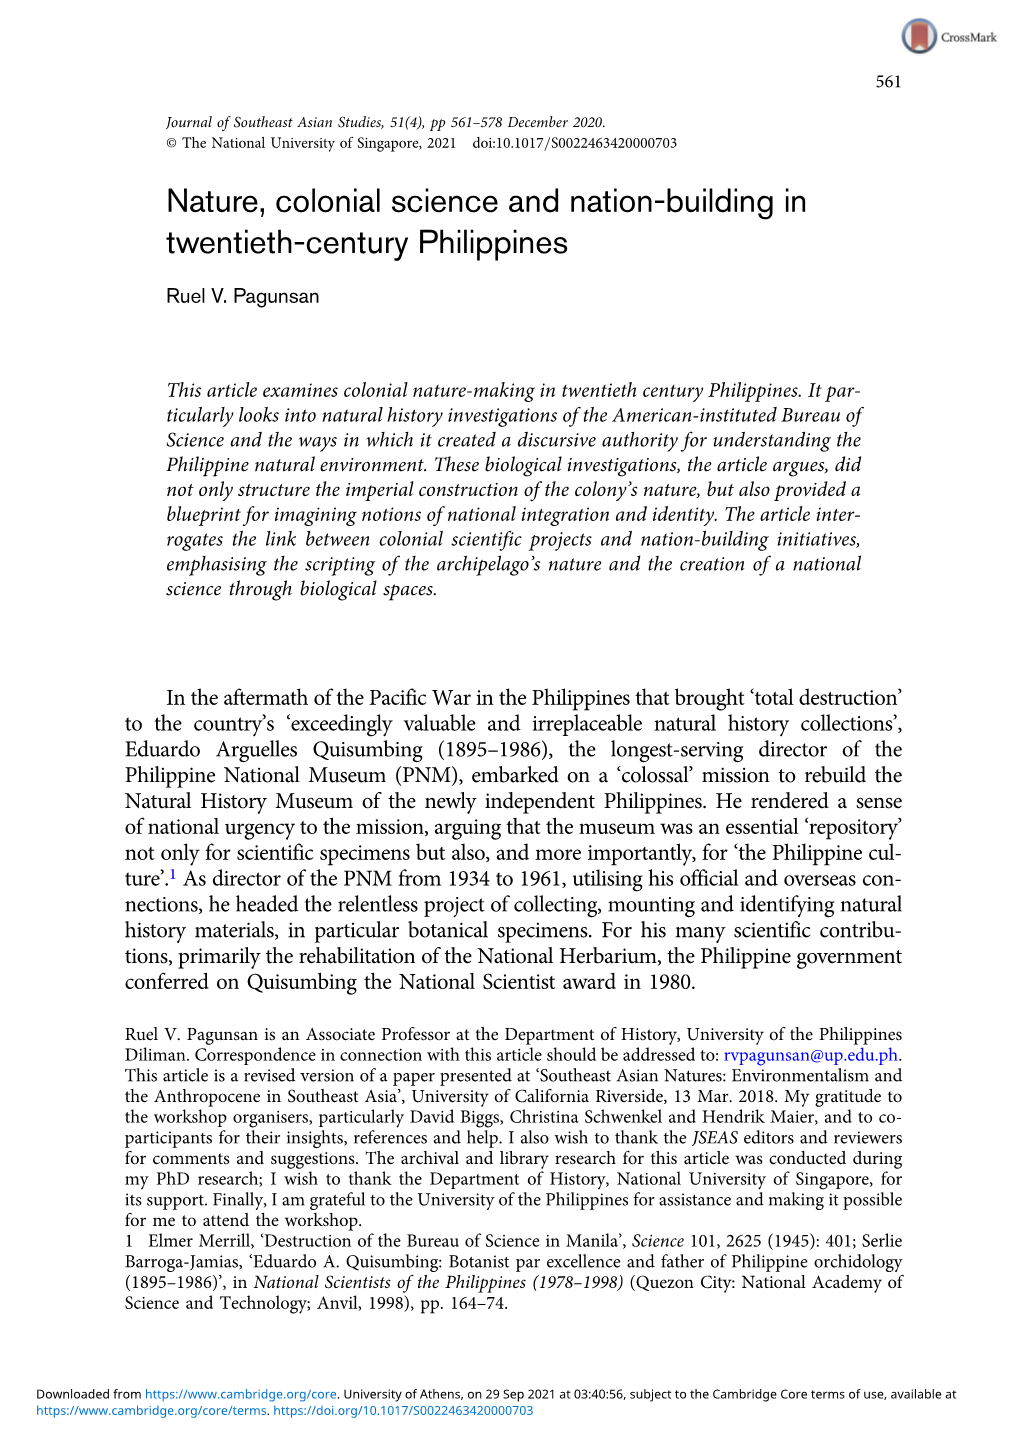 Nature, Colonial Science and Nation-Building in Twentieth-Century Philippines